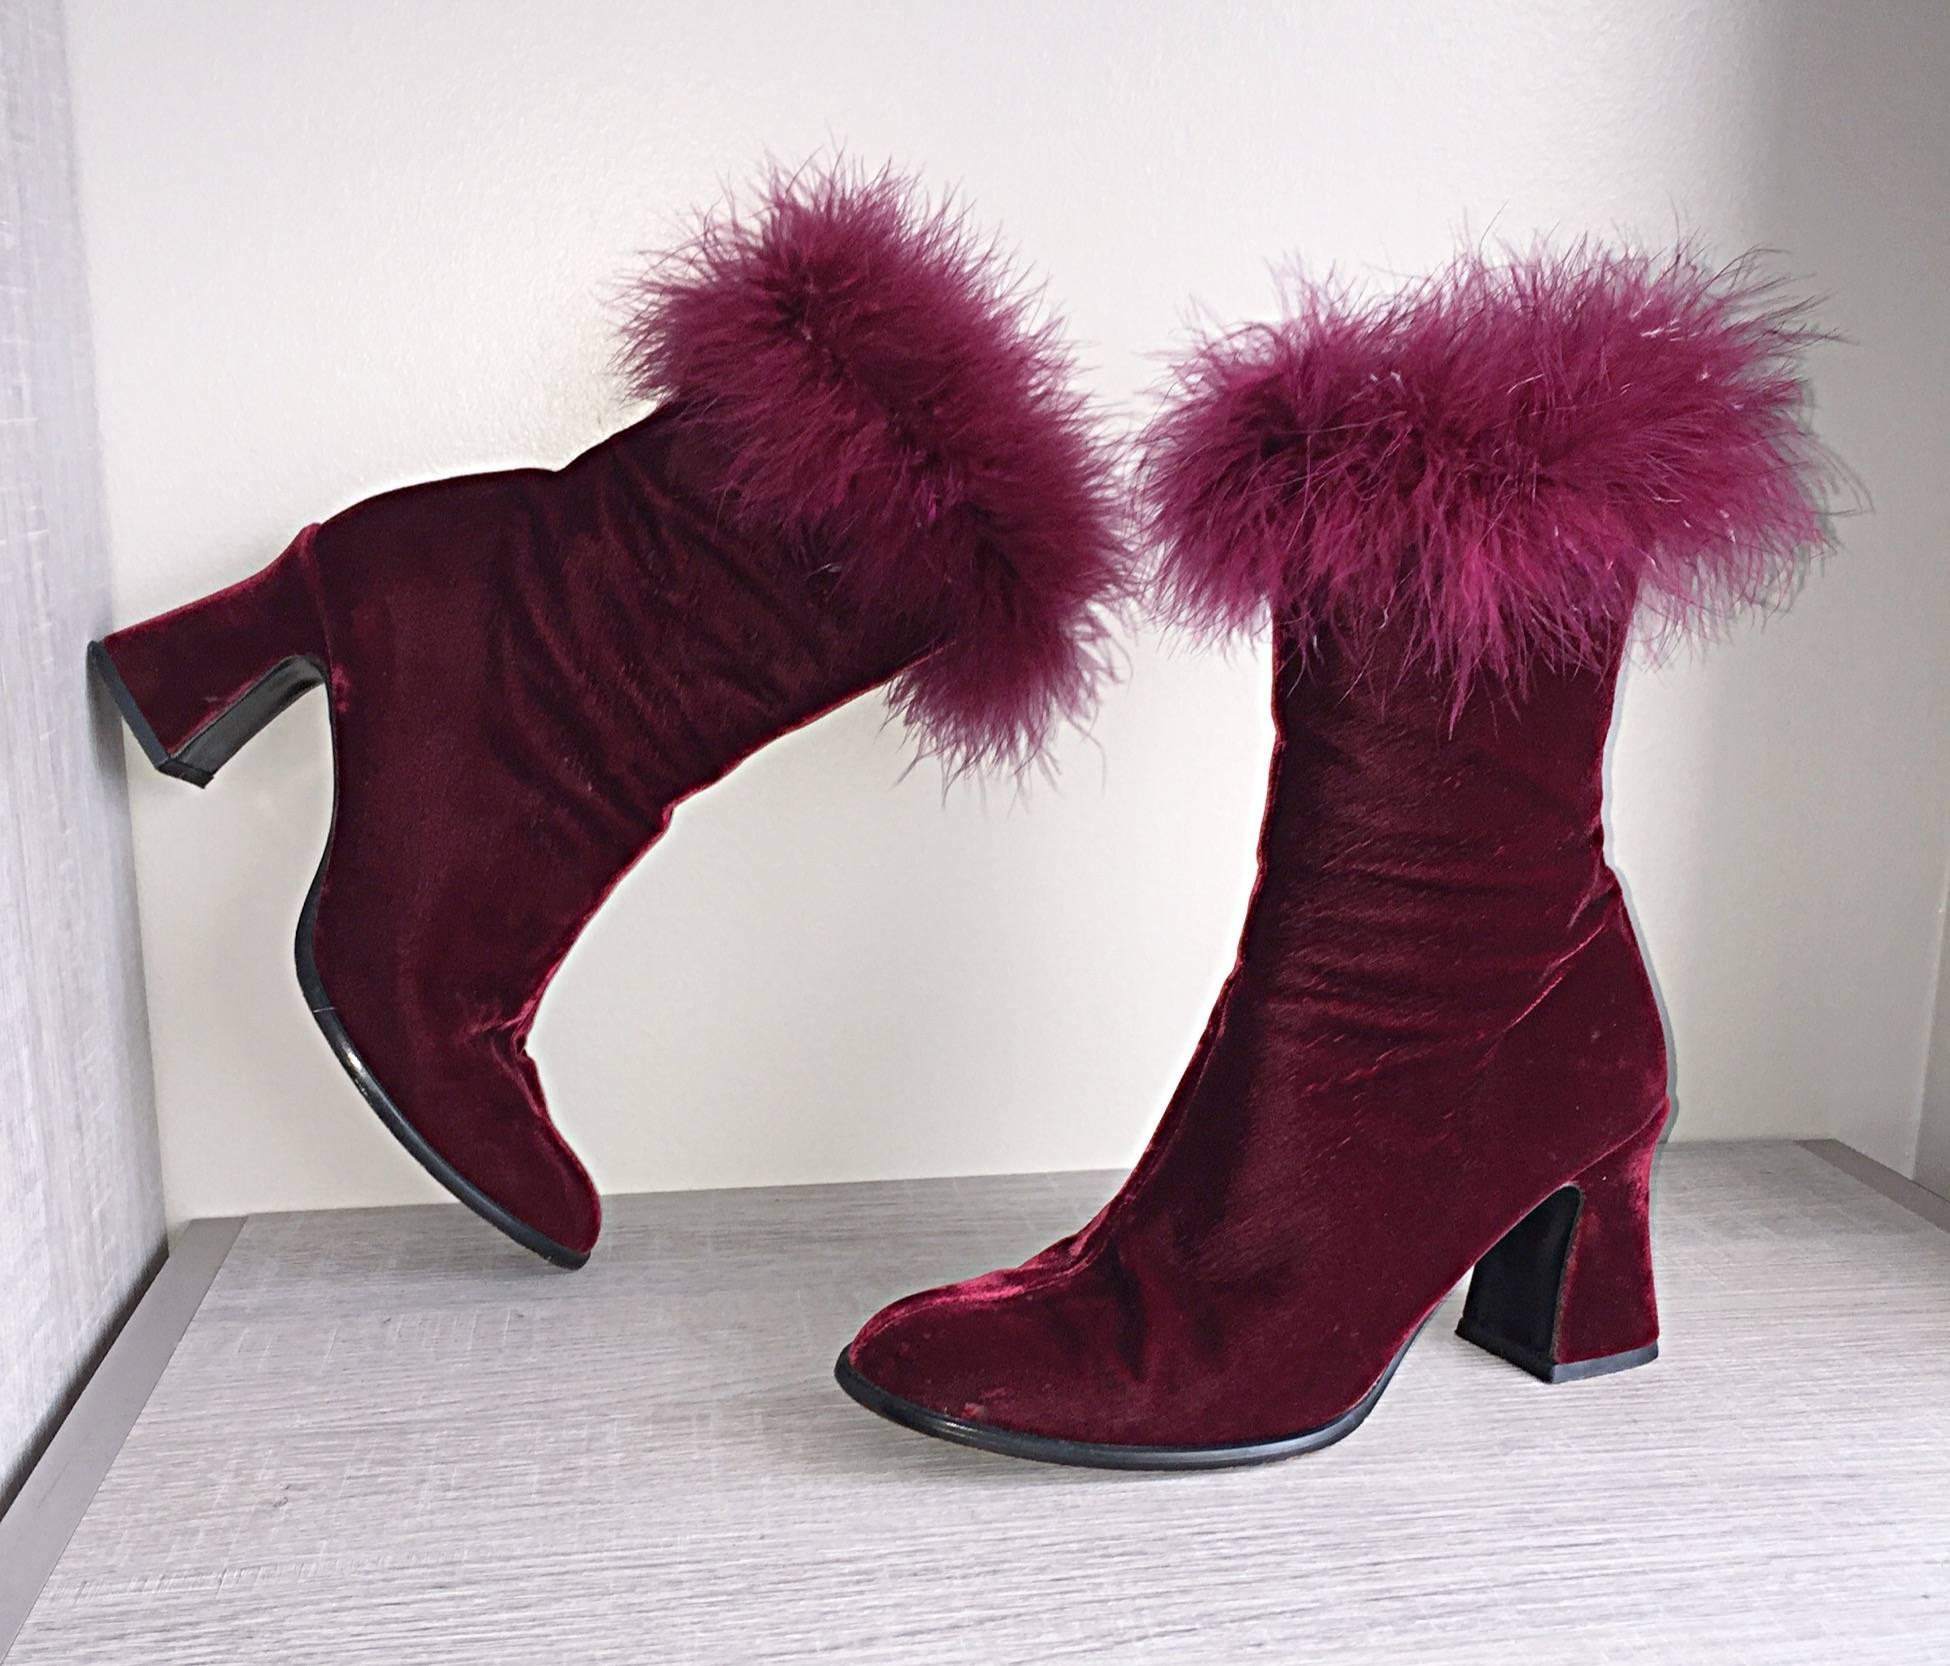 Rare Vintage Charles Jourdan Size 7.5 Merlot Wine Velvet Ostrich Feather Booties In Excellent Condition For Sale In San Diego, CA